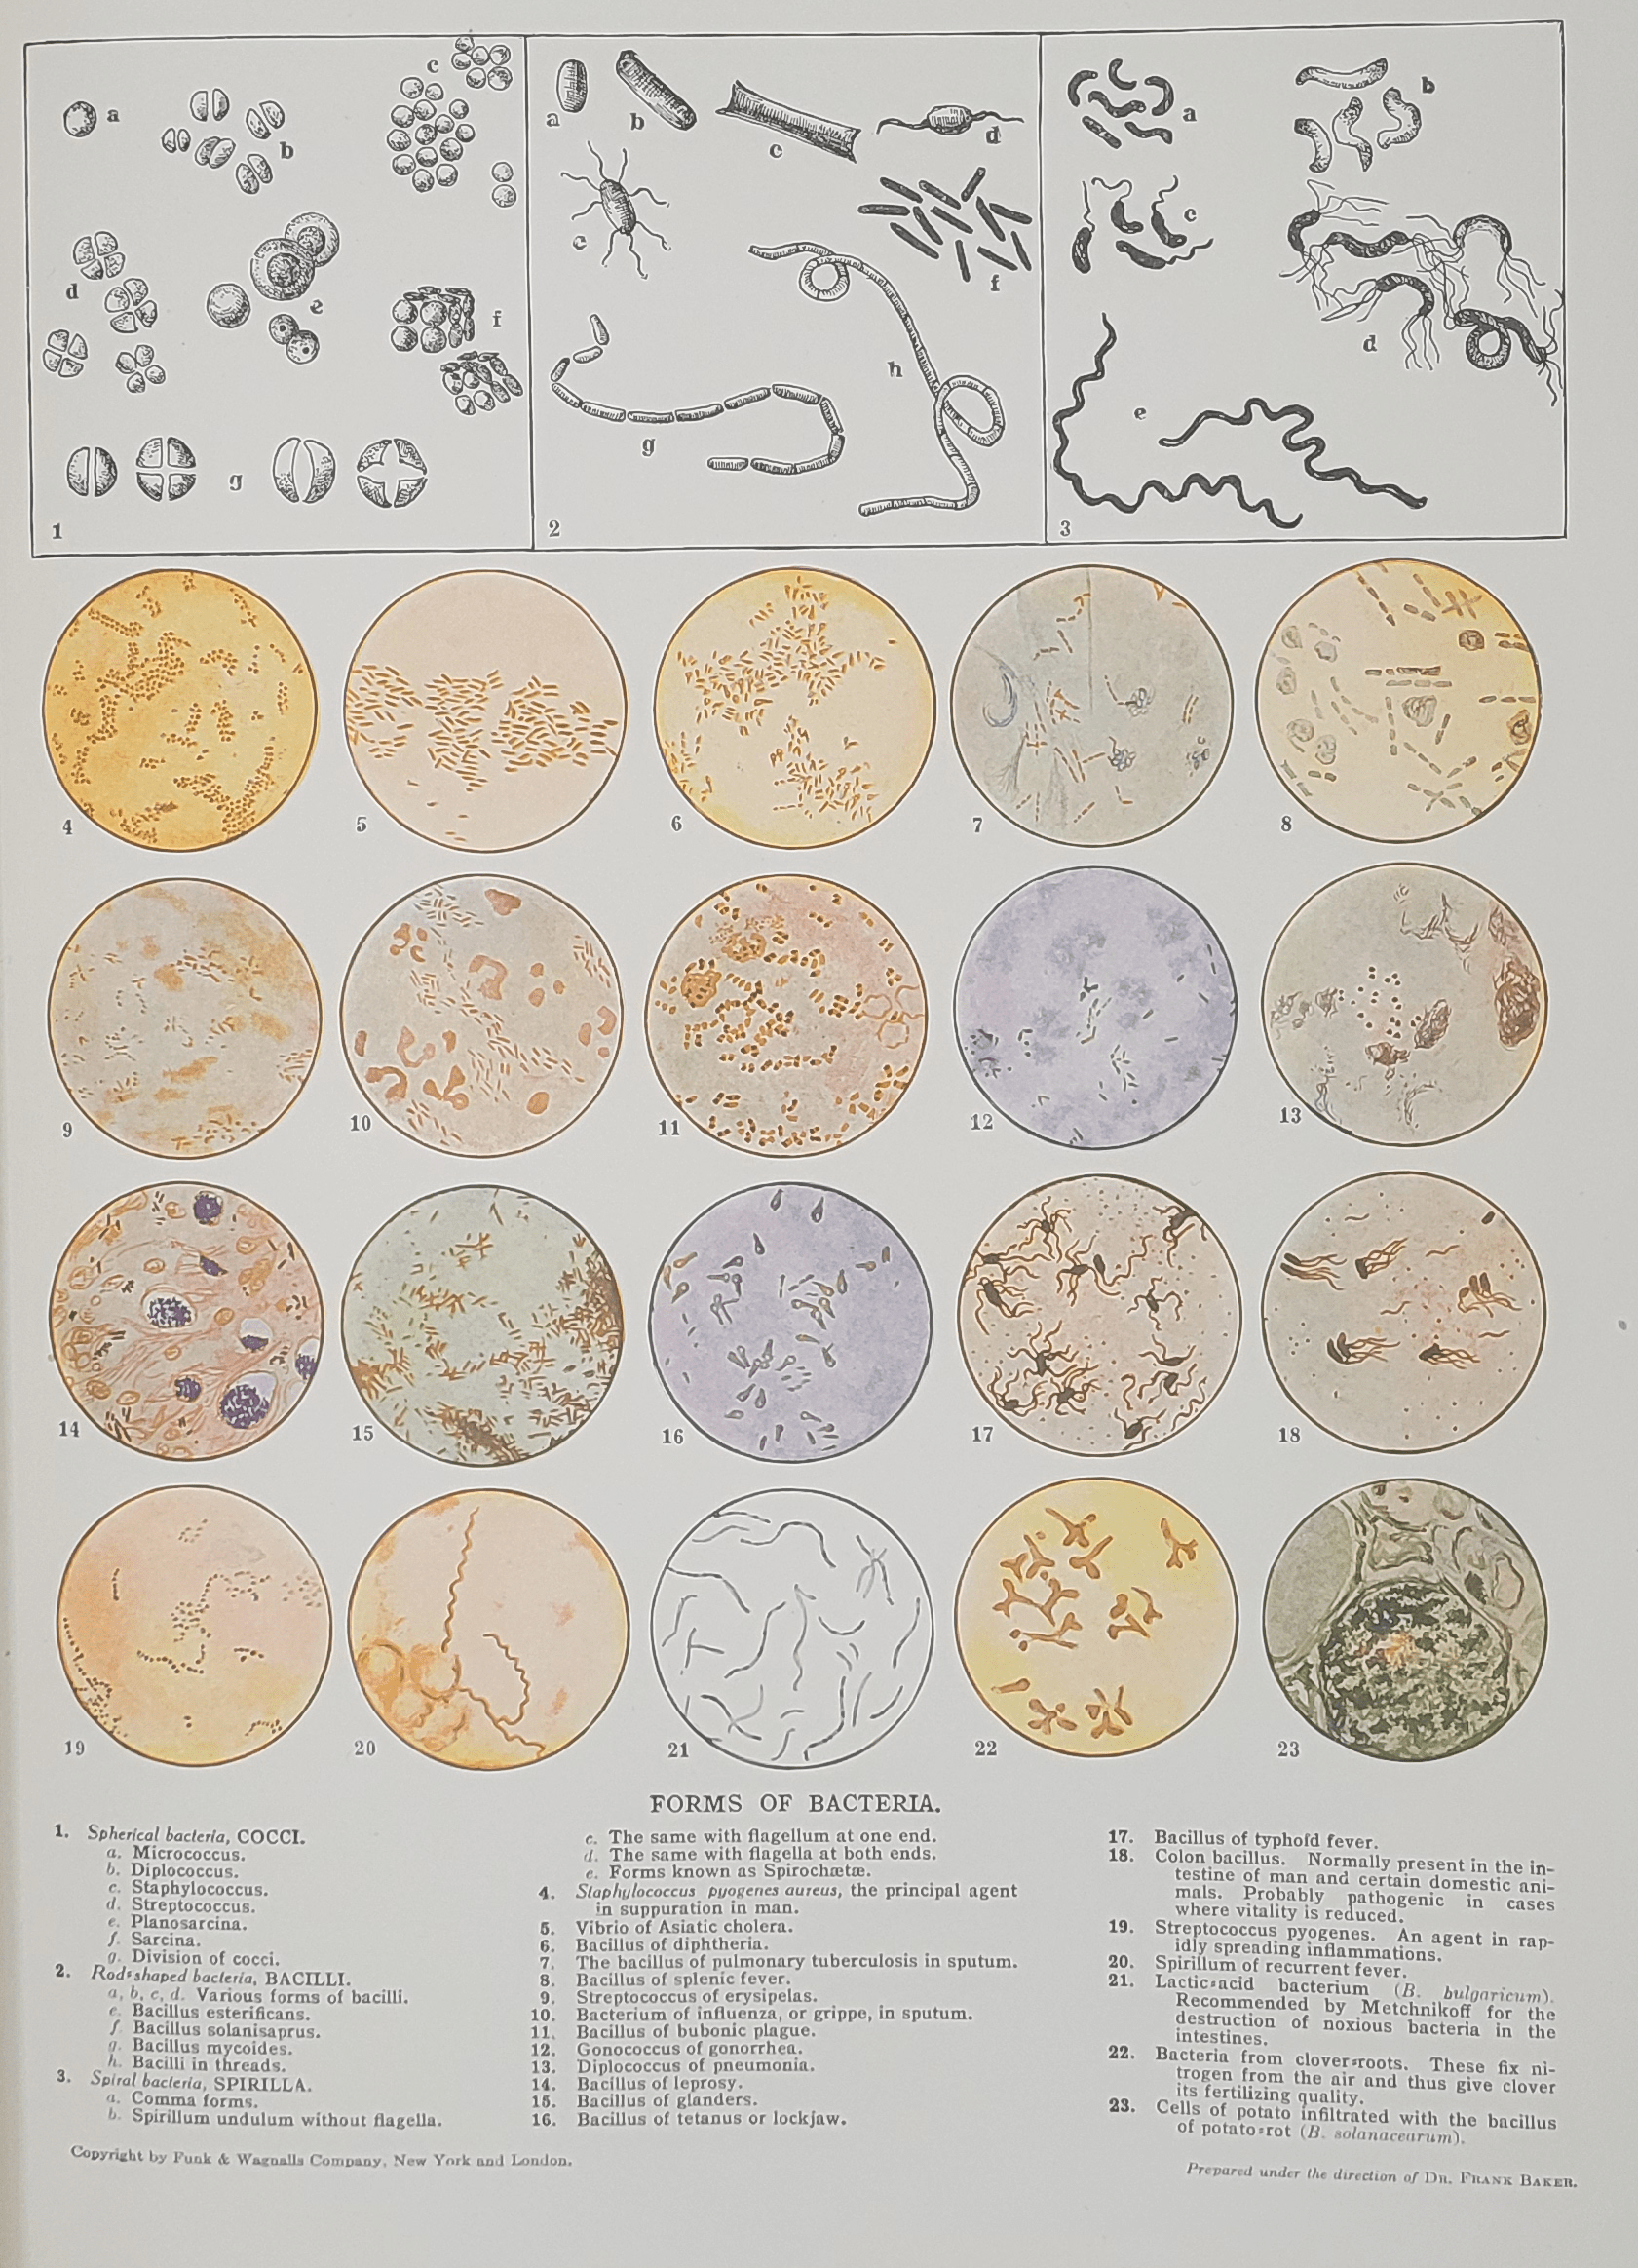 Color plate showing forms of bacteria